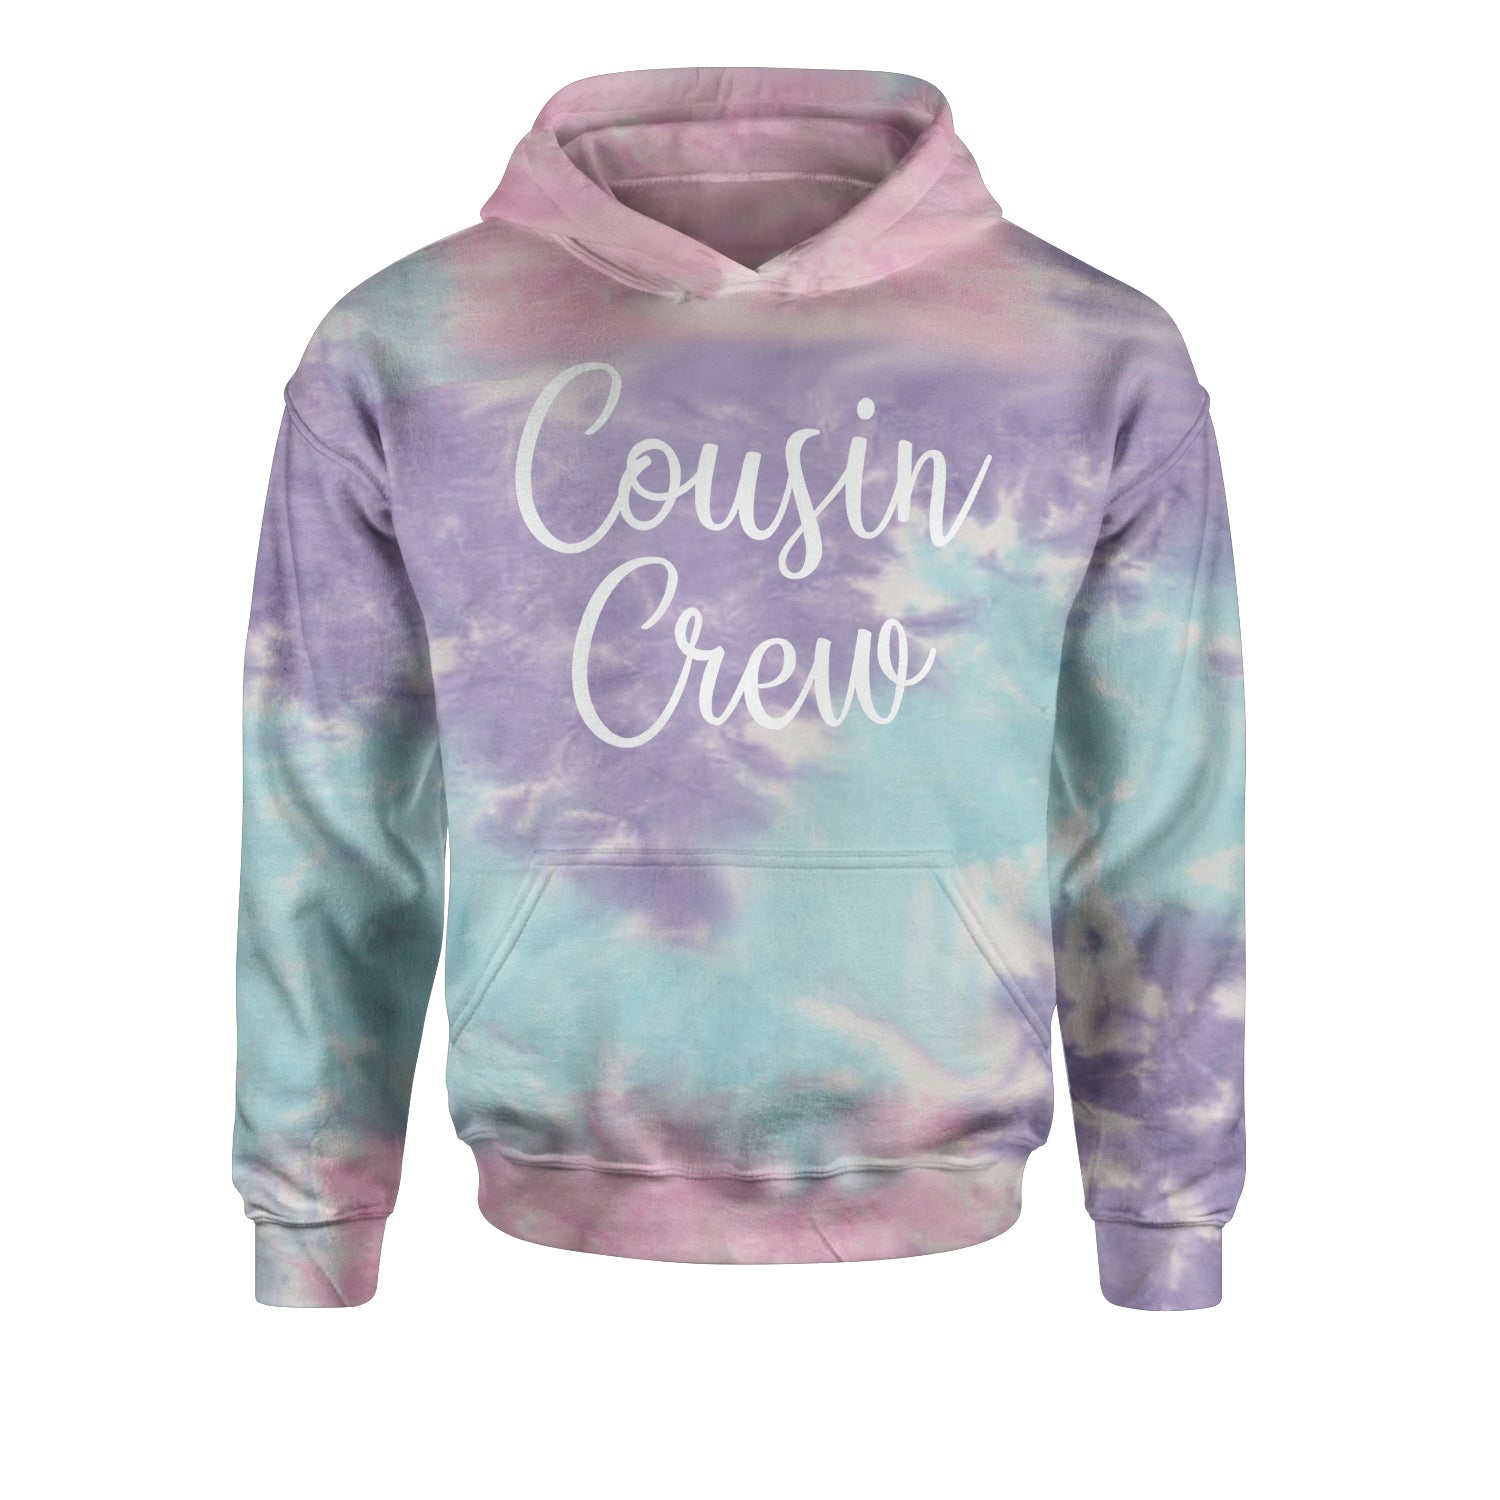 Cousin Crew Fun Family Outfit Youth-Sized Hoodie barbecue, bbq, cook, family, out, reunion by Expression Tees